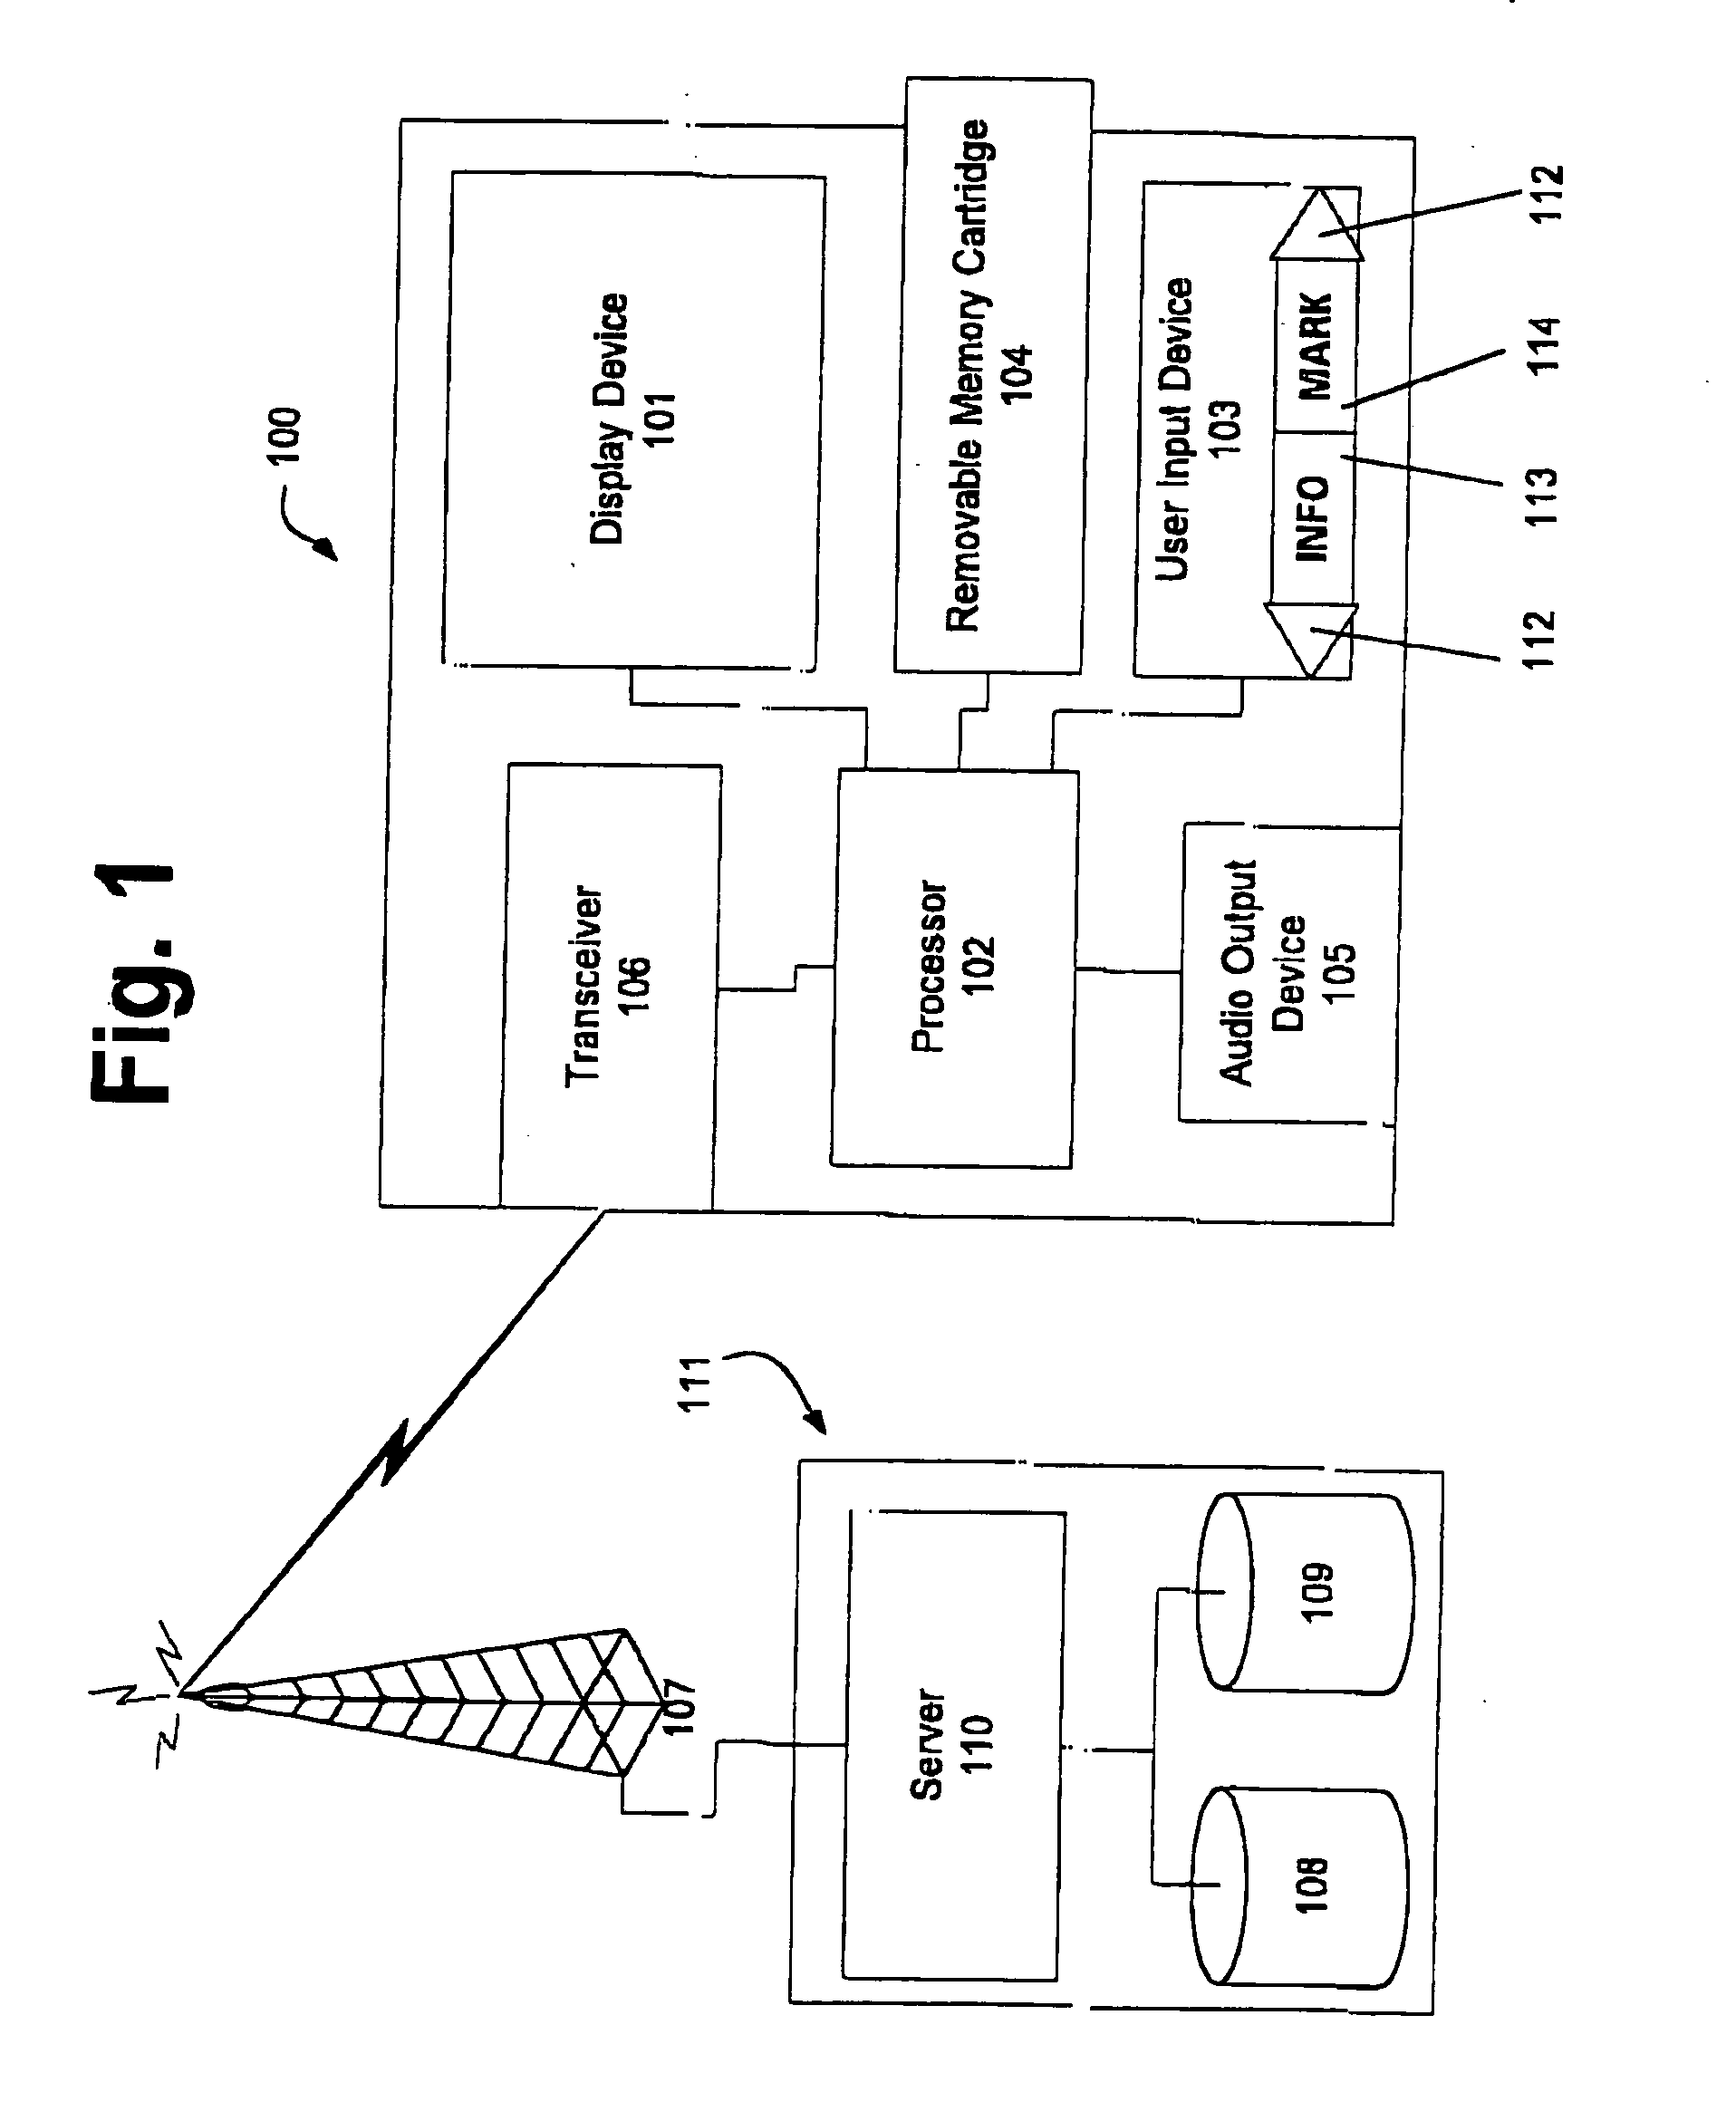 Method and system for interactive digital radio broadcasting and music distribution